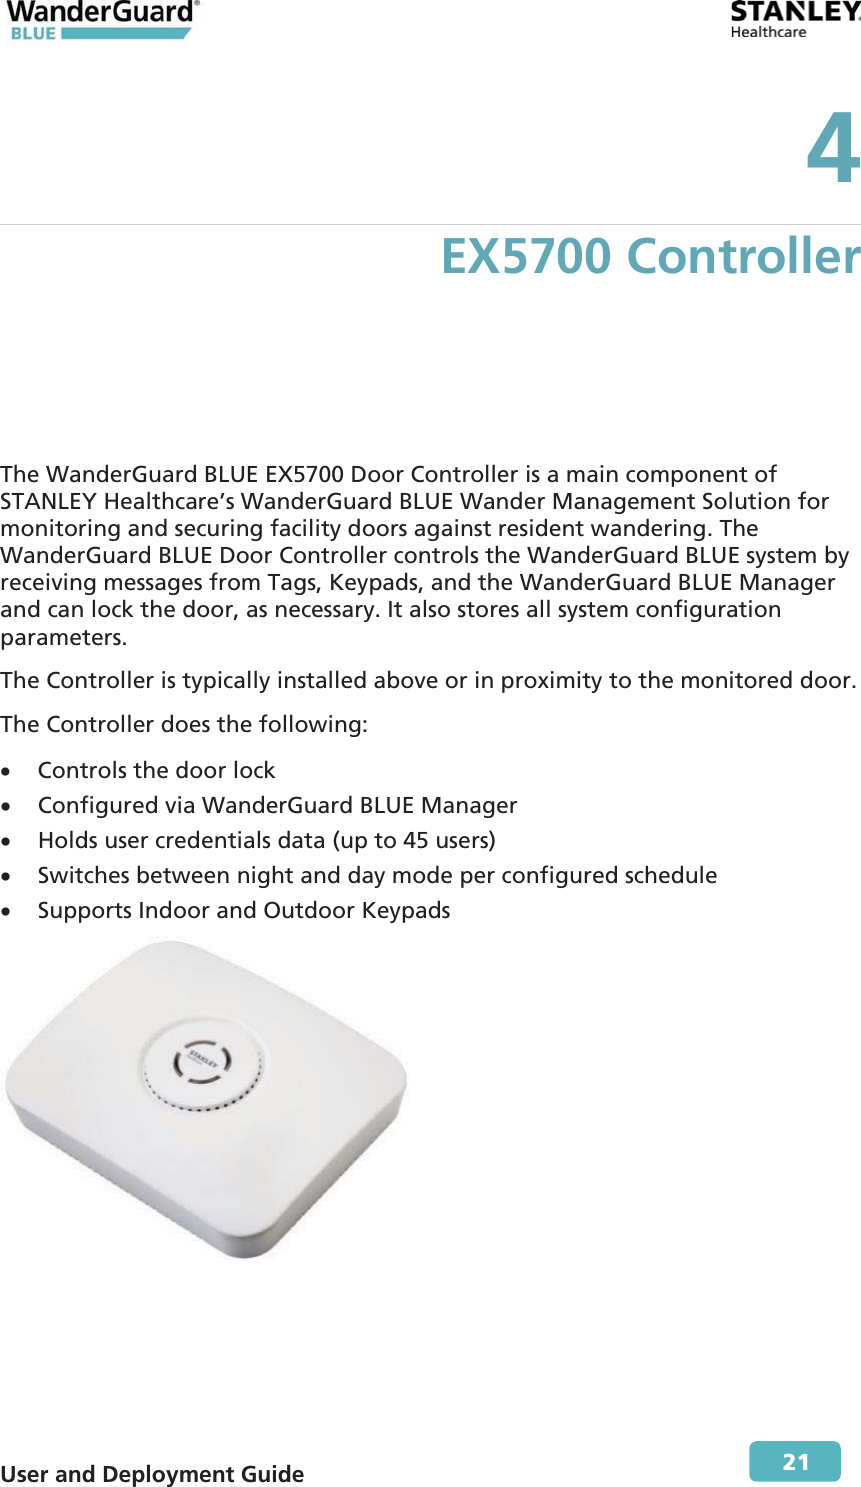  User and Deployment Guide        21 4 EX5700 Controller The WanderGuard BLUE EX5700 Door Controller is a main component of STANLEY Healthcare’s WanderGuard BLUE Wander Management Solution for monitoring and securing facility doors against resident wandering. The WanderGuard BLUE Door Controller controls the WanderGuard BLUE system by receiving messages from Tags, Keypads, and the WanderGuard BLUE Manager and can lock the door, as necessary. It also stores all system configuration parameters. The Controller is typically installed above or in proximity to the monitored door. The Controller does the following: x Controls the door lock x Configured via WanderGuard BLUE Manager x Holds user credentials data (up to 45 users) x Switches between night and day mode per configured schedule x Supports Indoor and Outdoor Keypads  